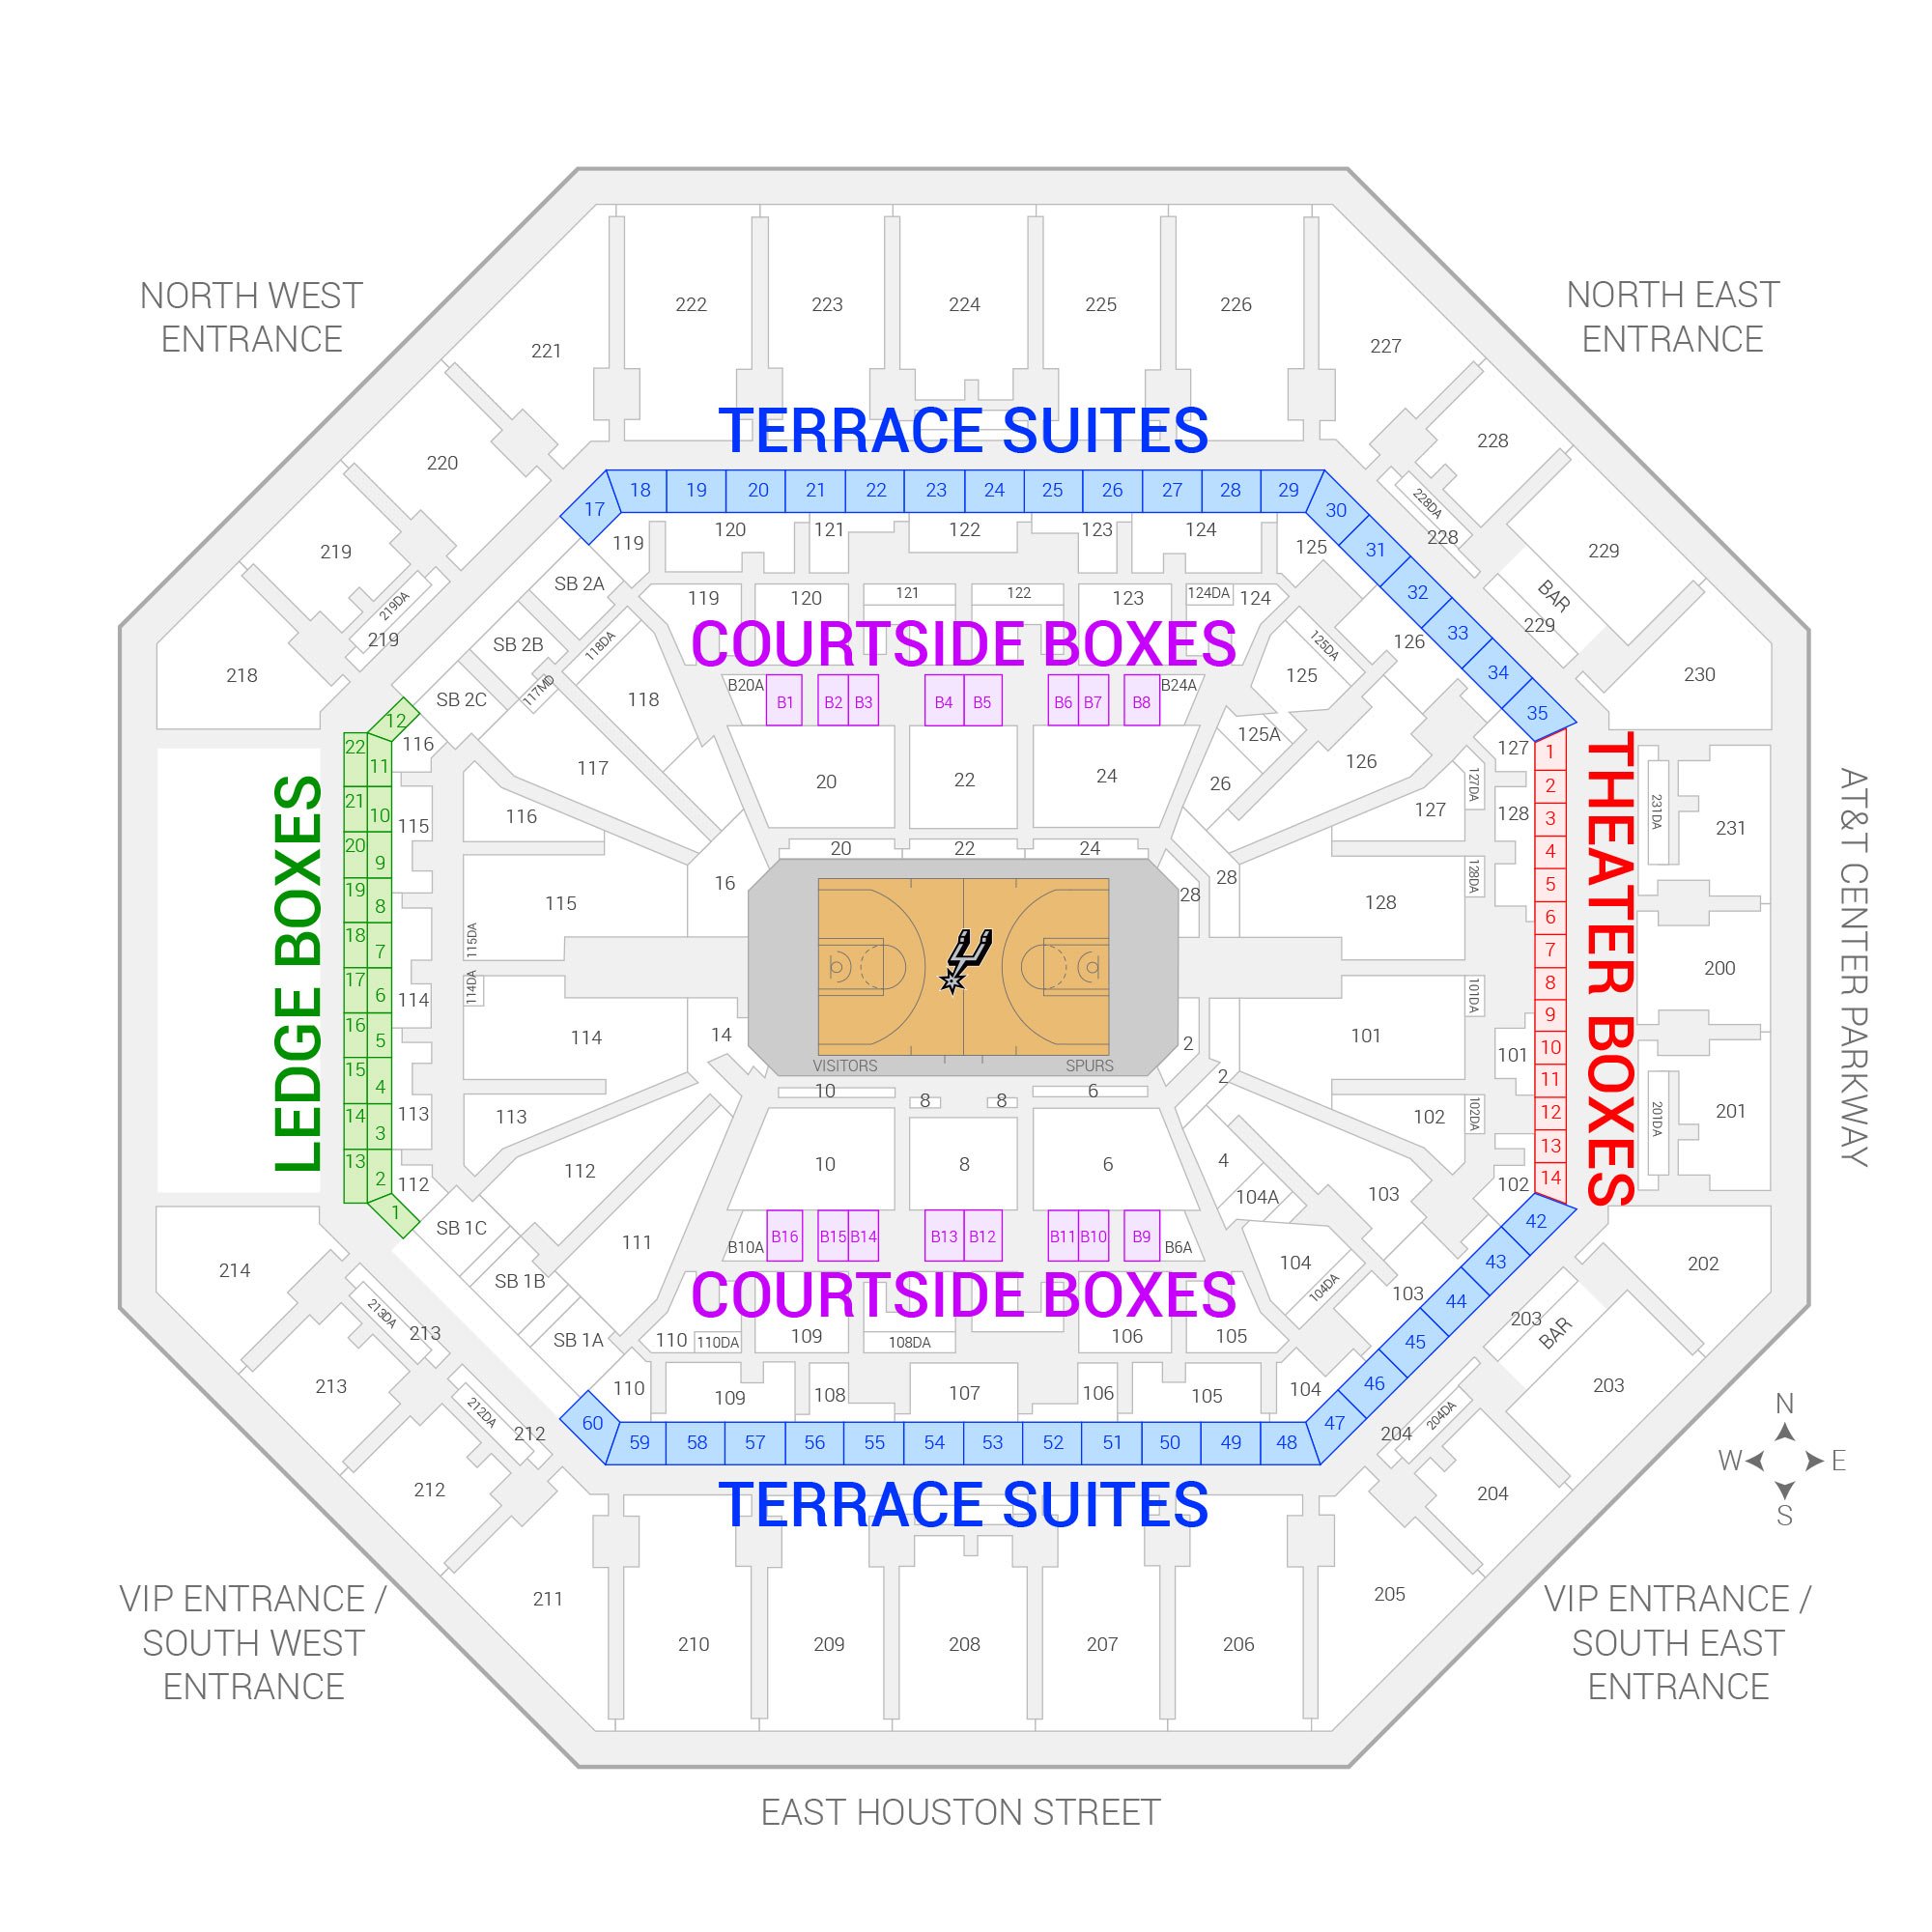 Frost Bank Center / San Antonio Spurs Suite Map and Seating Chart